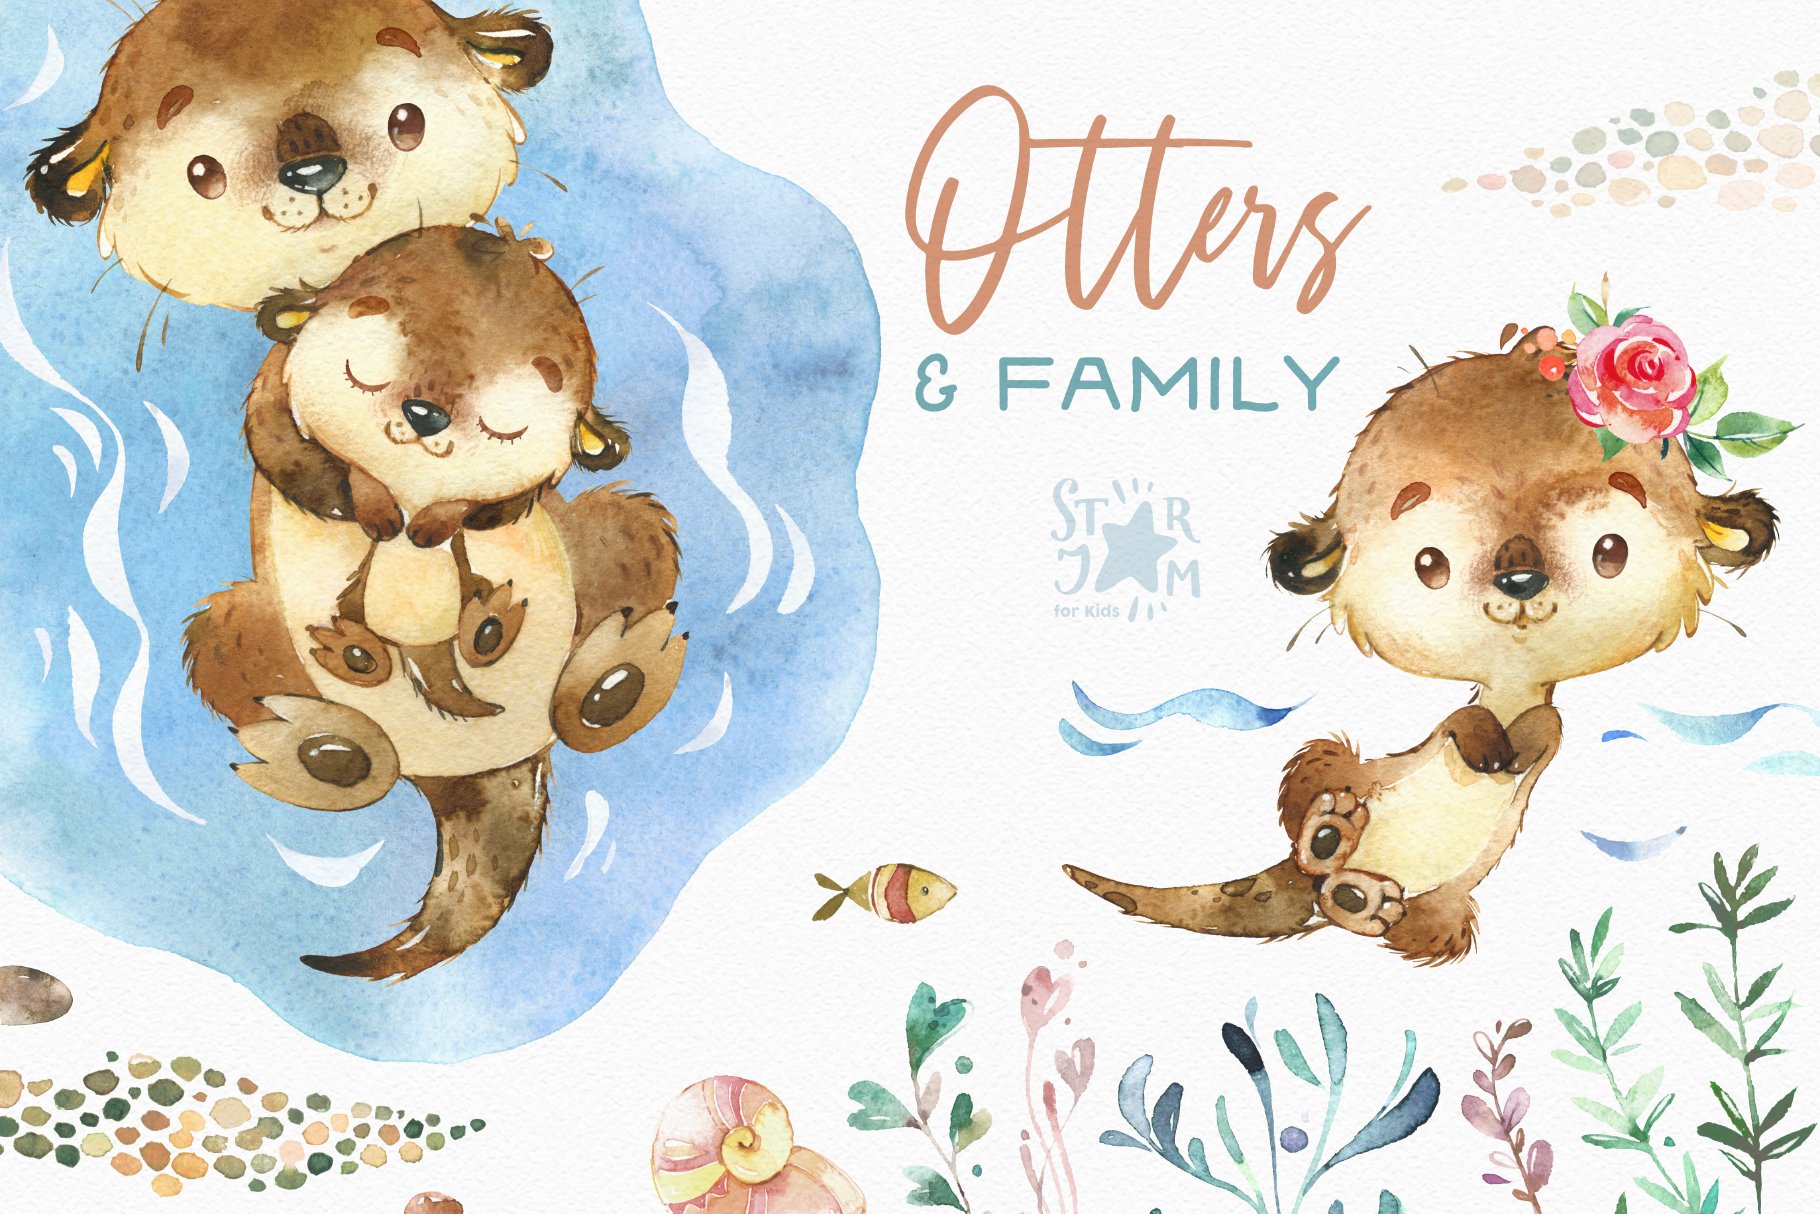 Otters & Family. Sea Collection cover image.